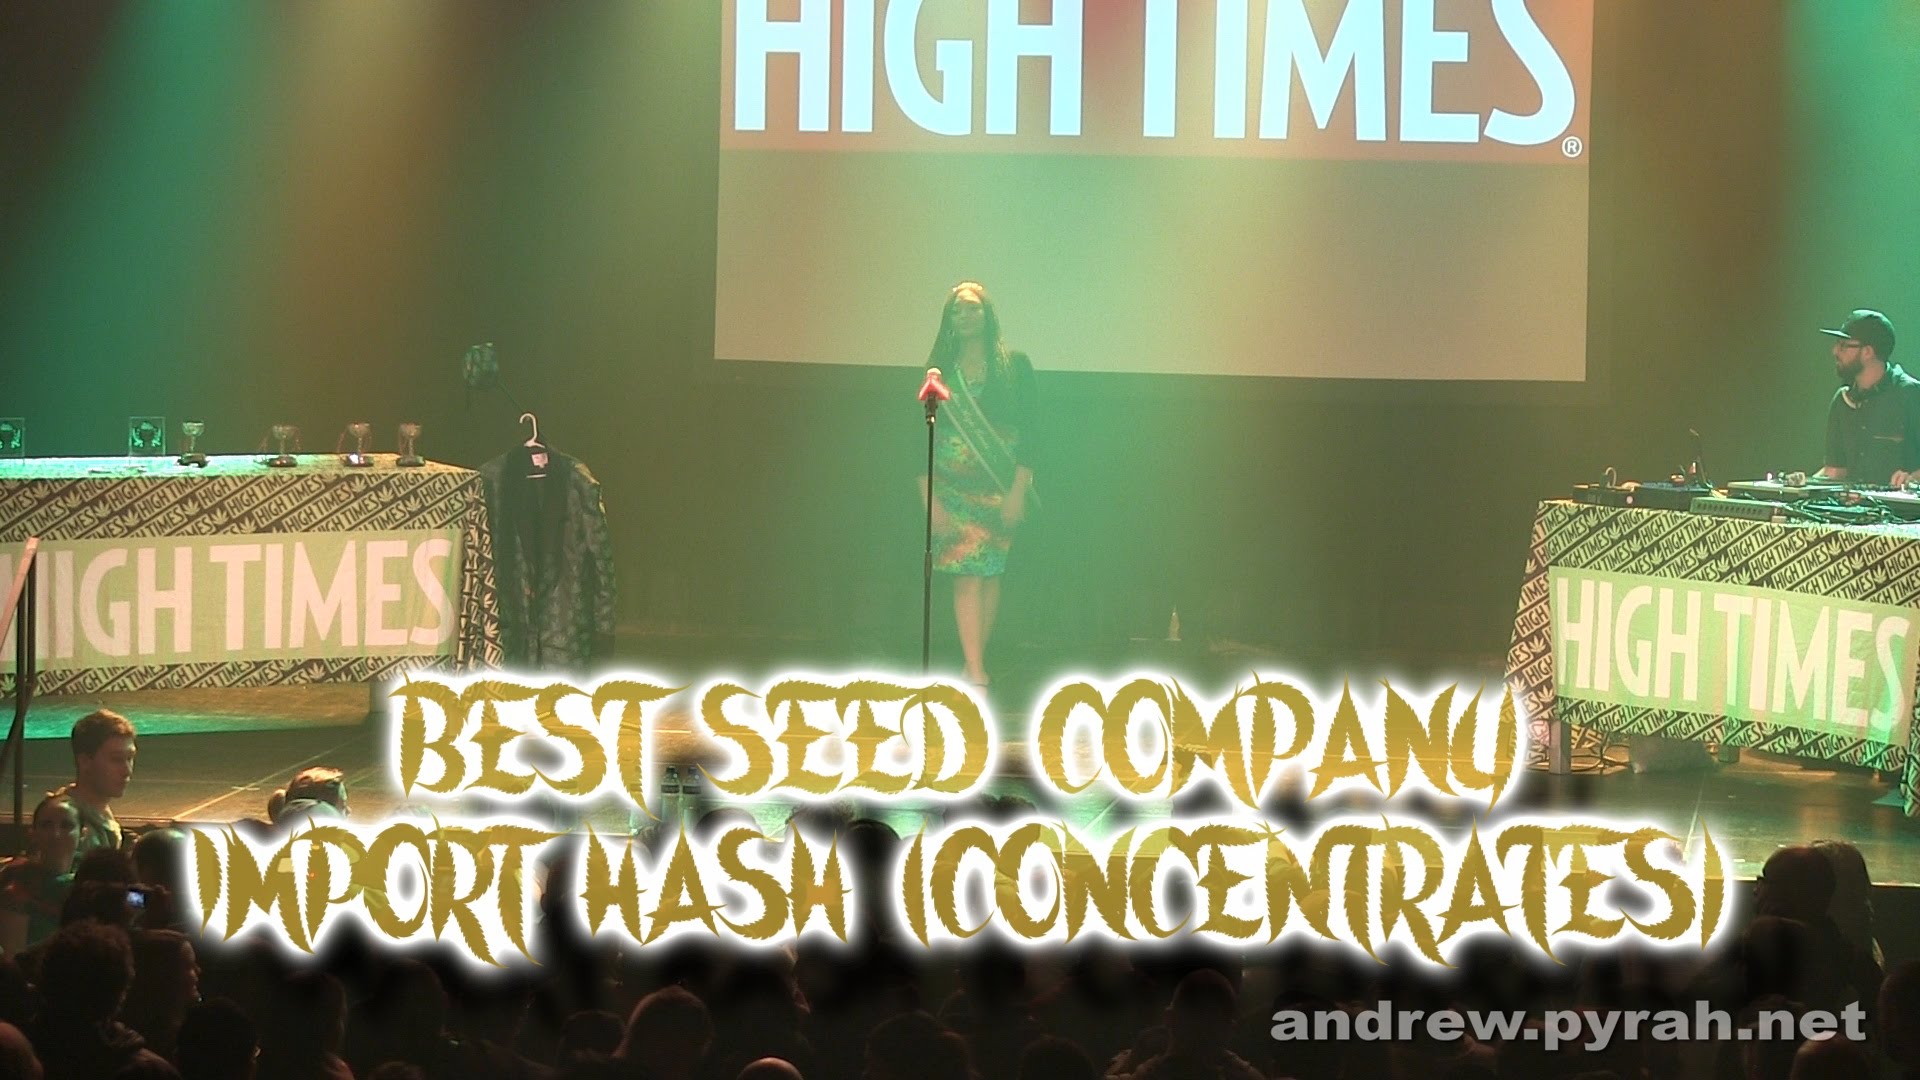 Best Seed Company Import Hash (Concentrates) – Amsterdam Cannabis Cup Award Winners 2014